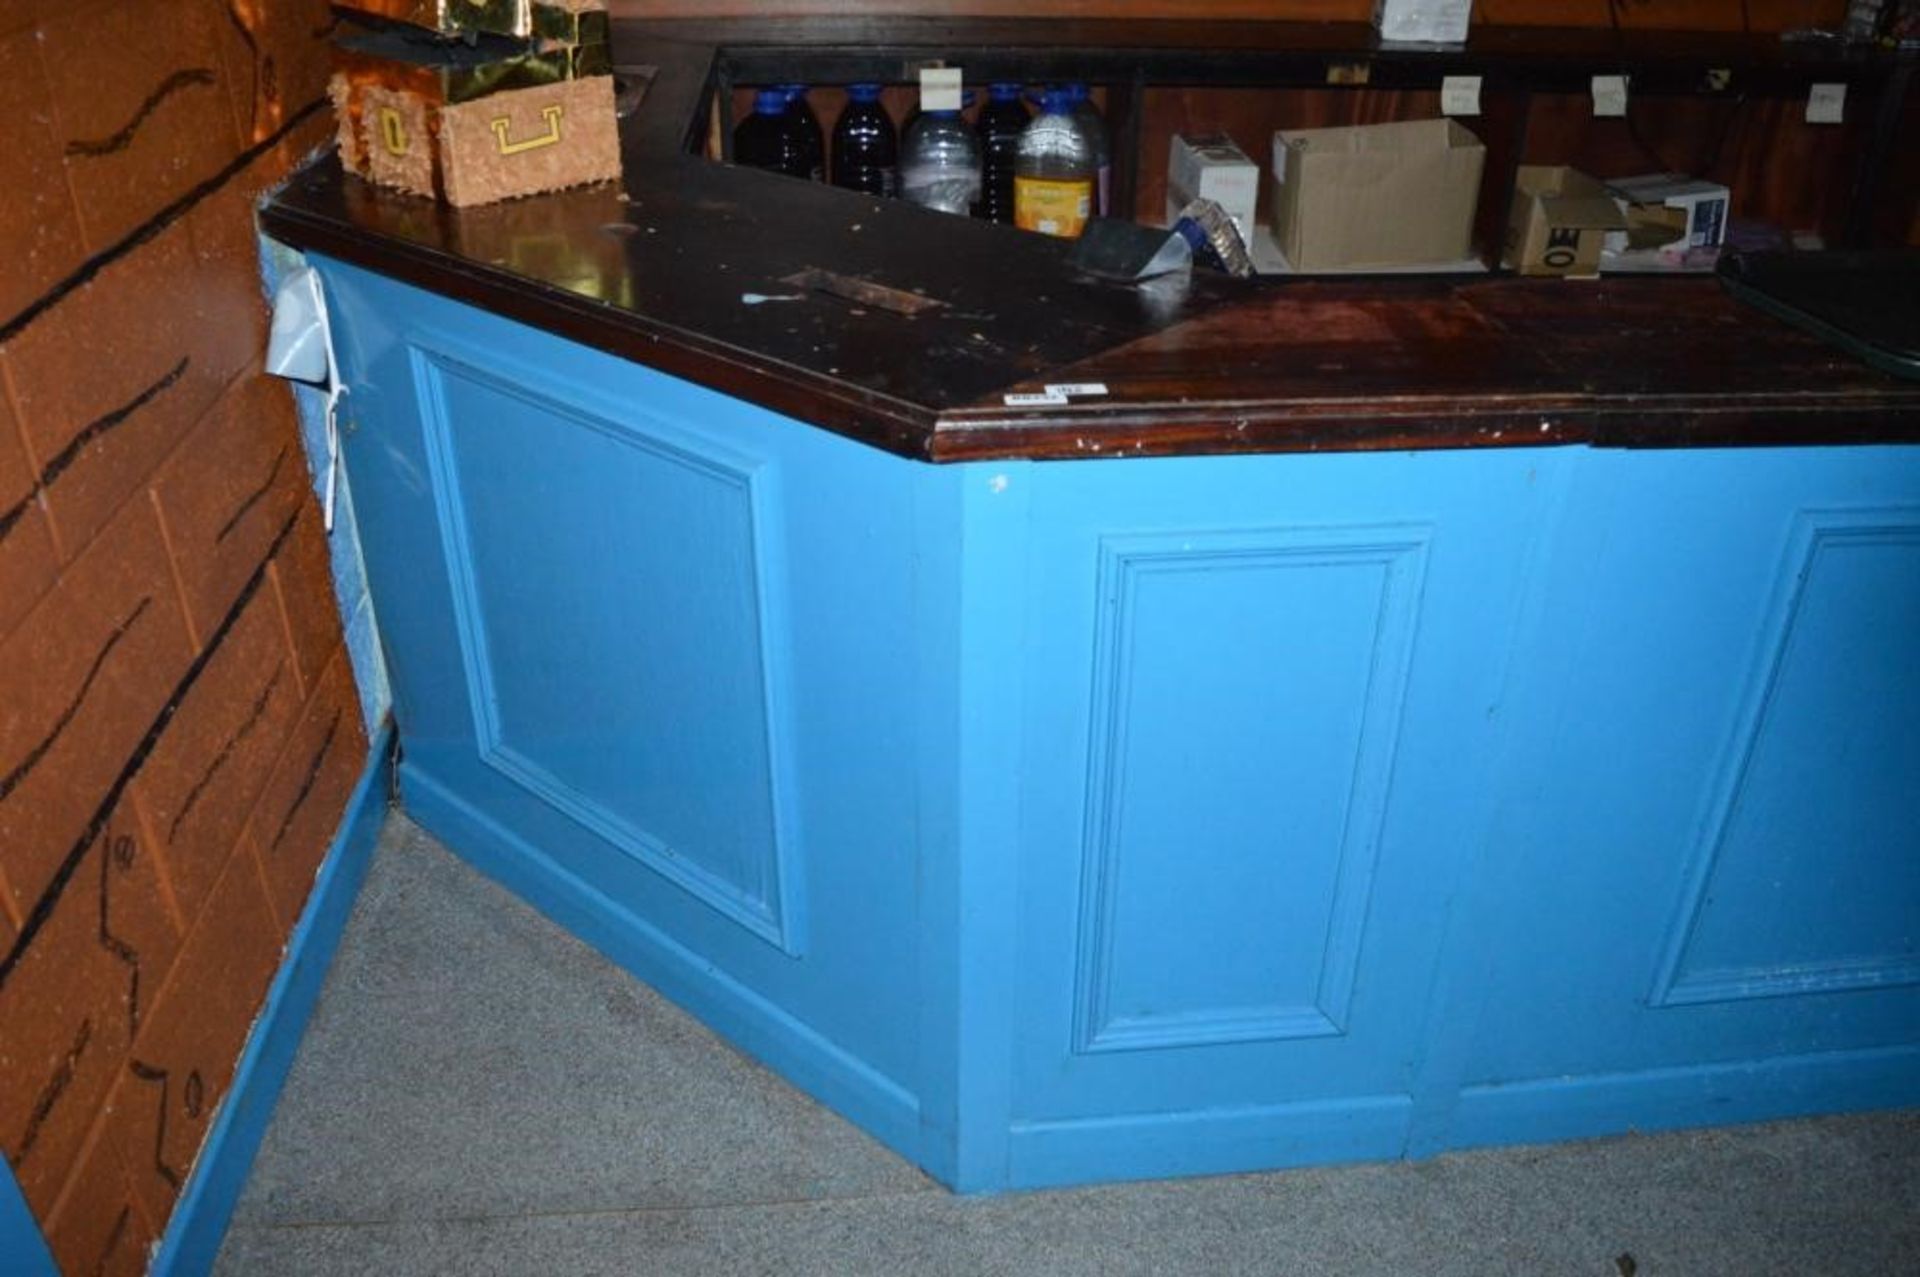 1 x Drinks Bar in Blue With Wooden Counter Top - Includes Backbar Storage and Single Handwash Basin - Image 5 of 11